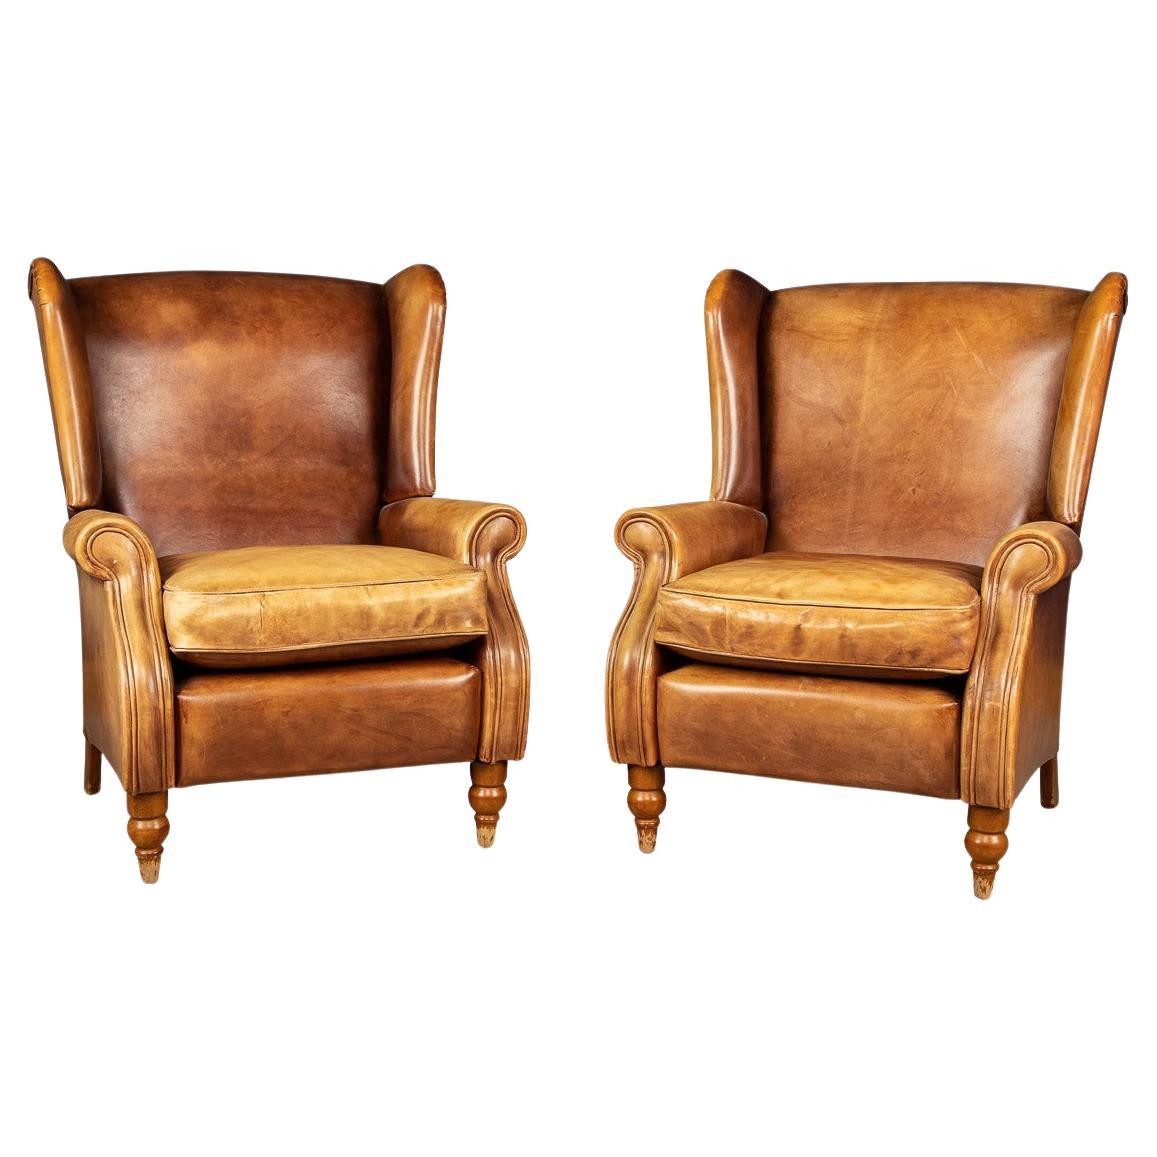 20th Century Pair of Dutch Sheepskin Leather Wingback Chairs